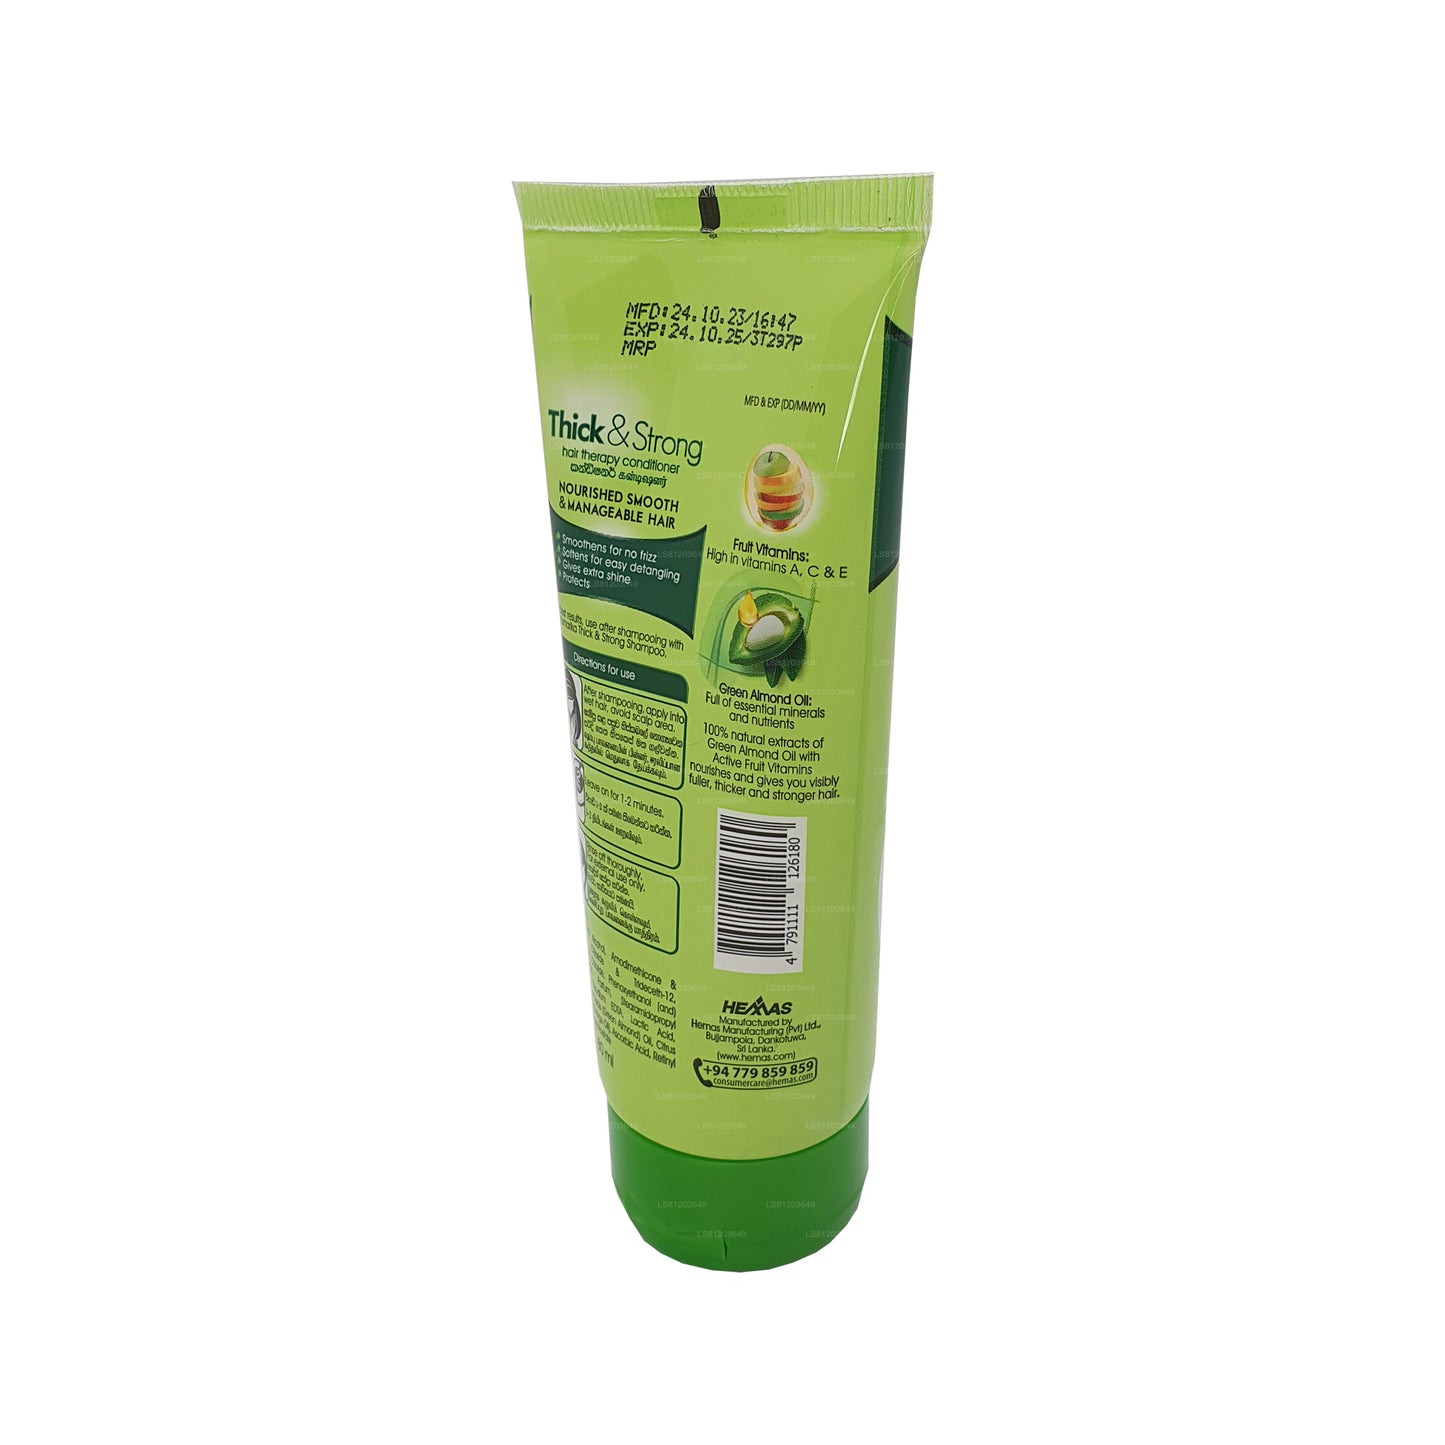 Kumarika Hair Therapy Conditioner Thick and Strong (80ml)